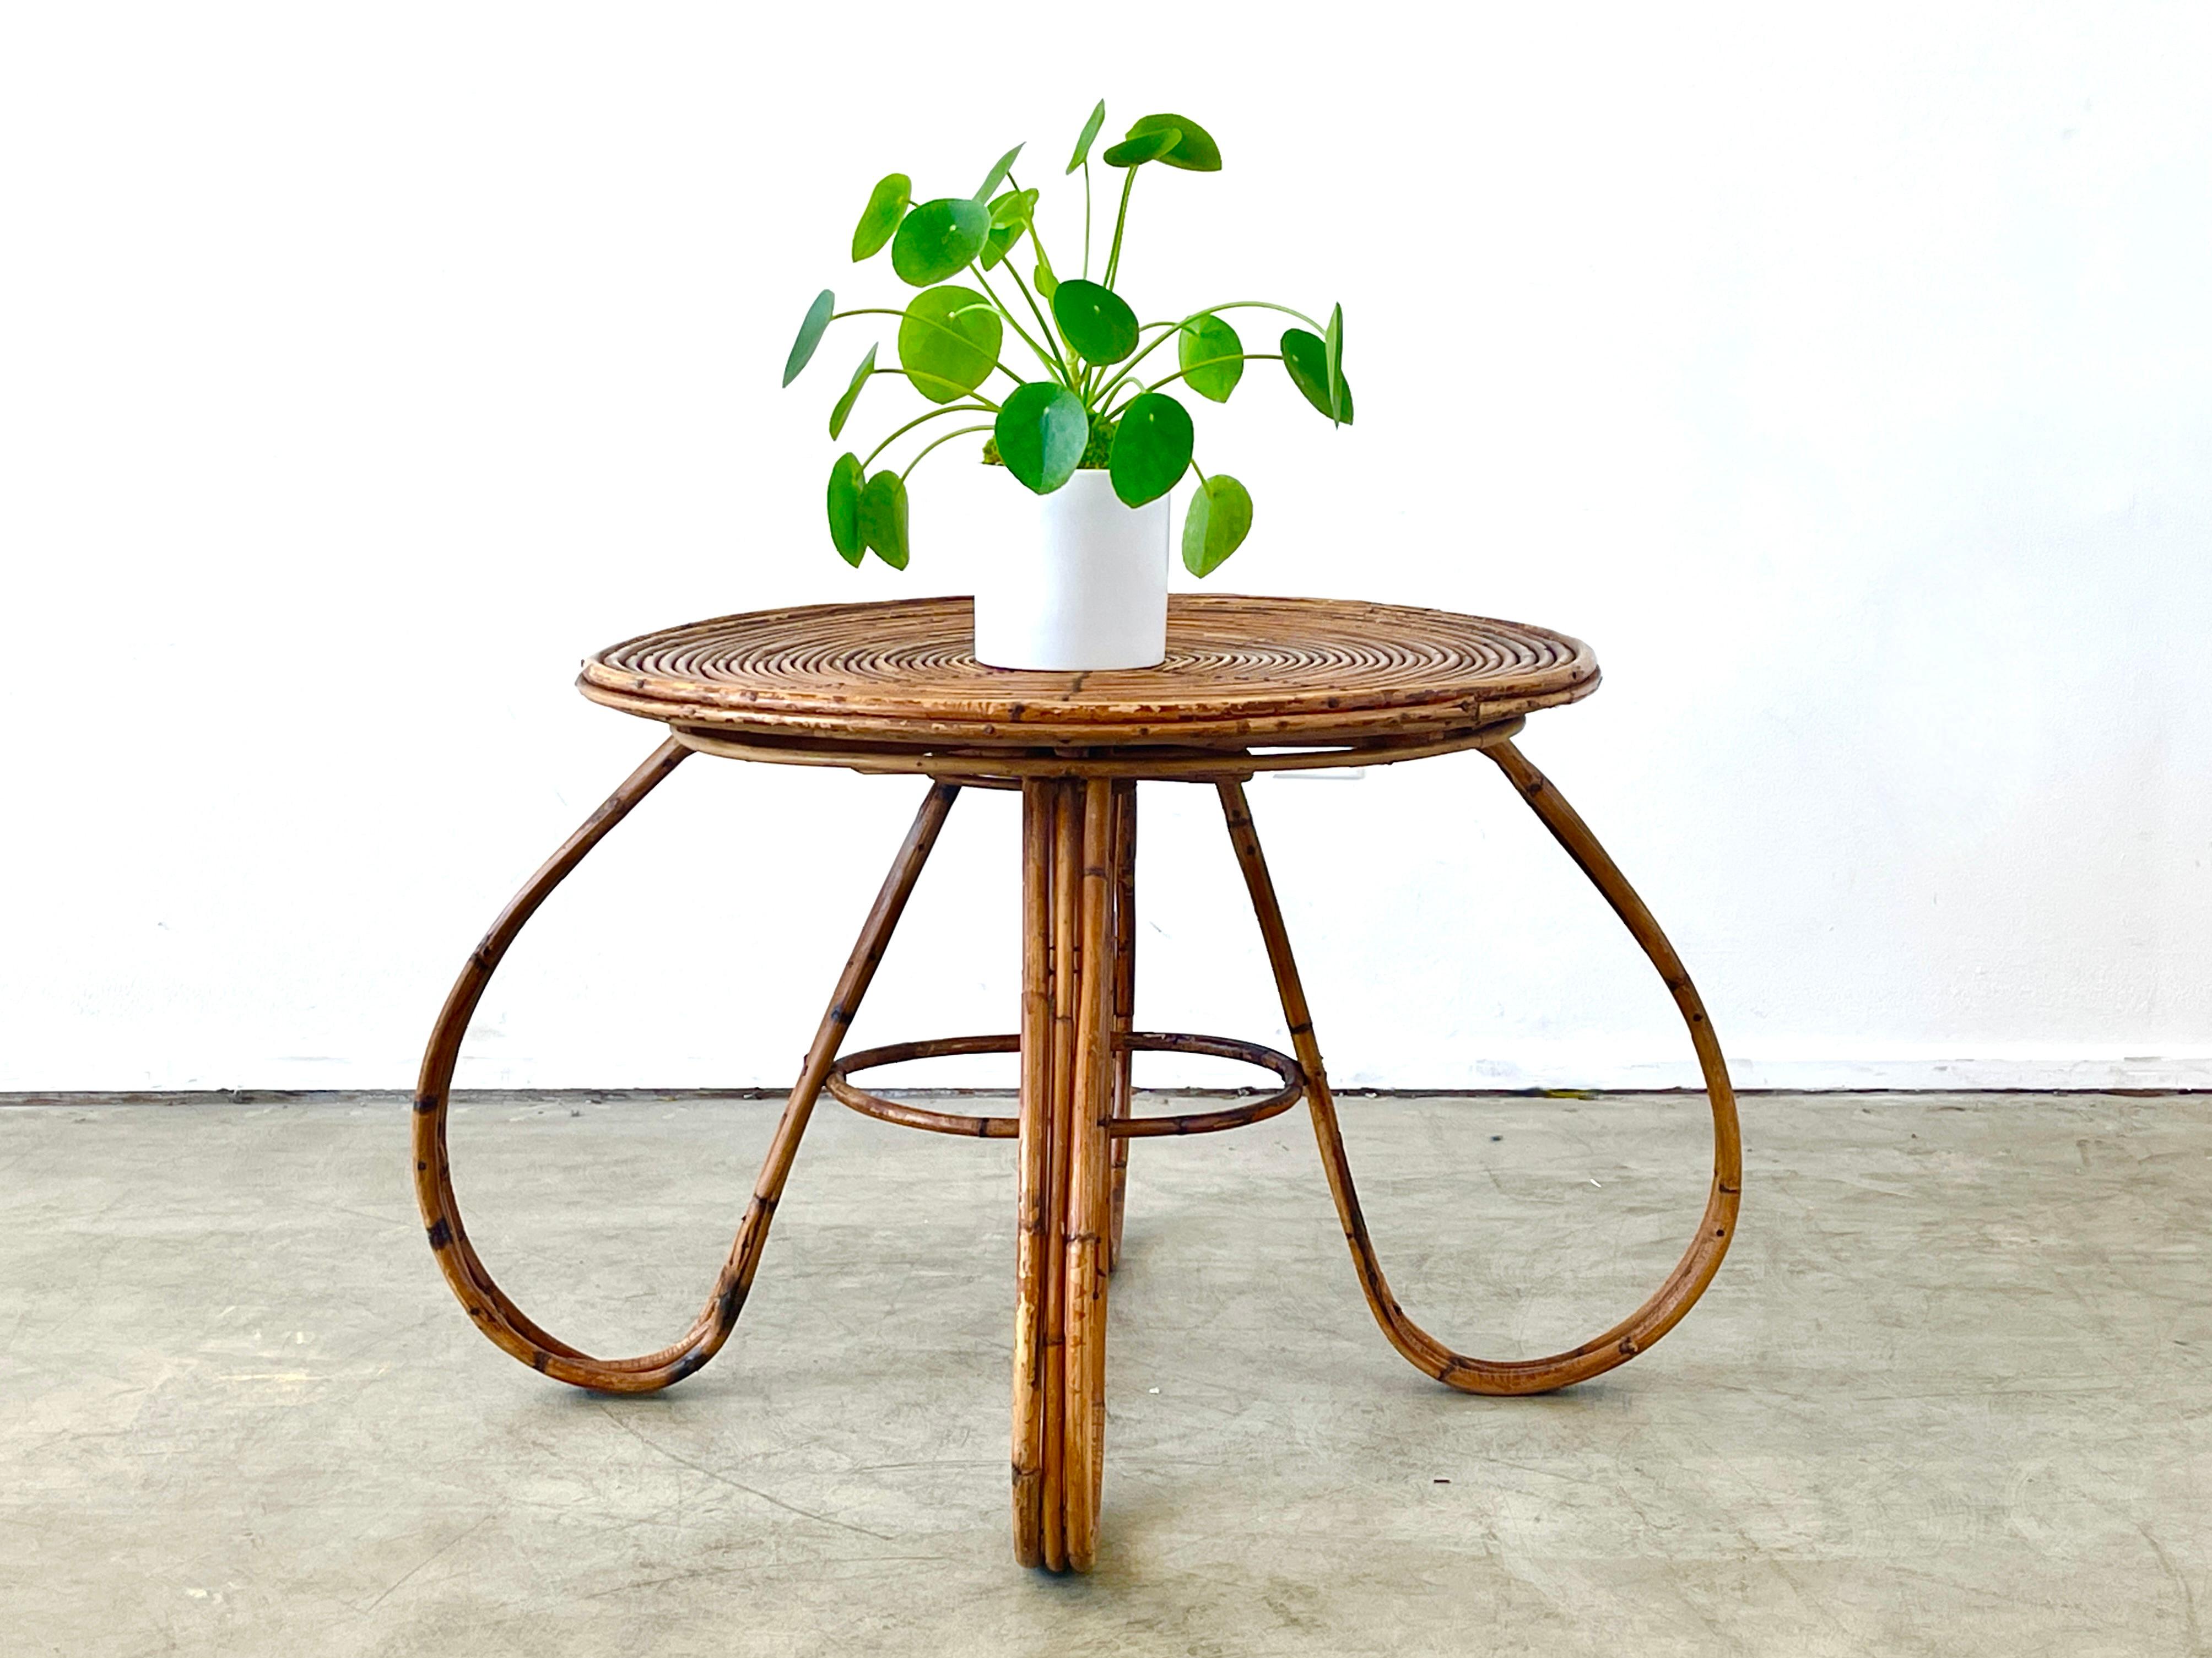 Wonderful sculptural bamboo table in the style of Tito Agnoli with large looped legs and circular round bamboo top. 

